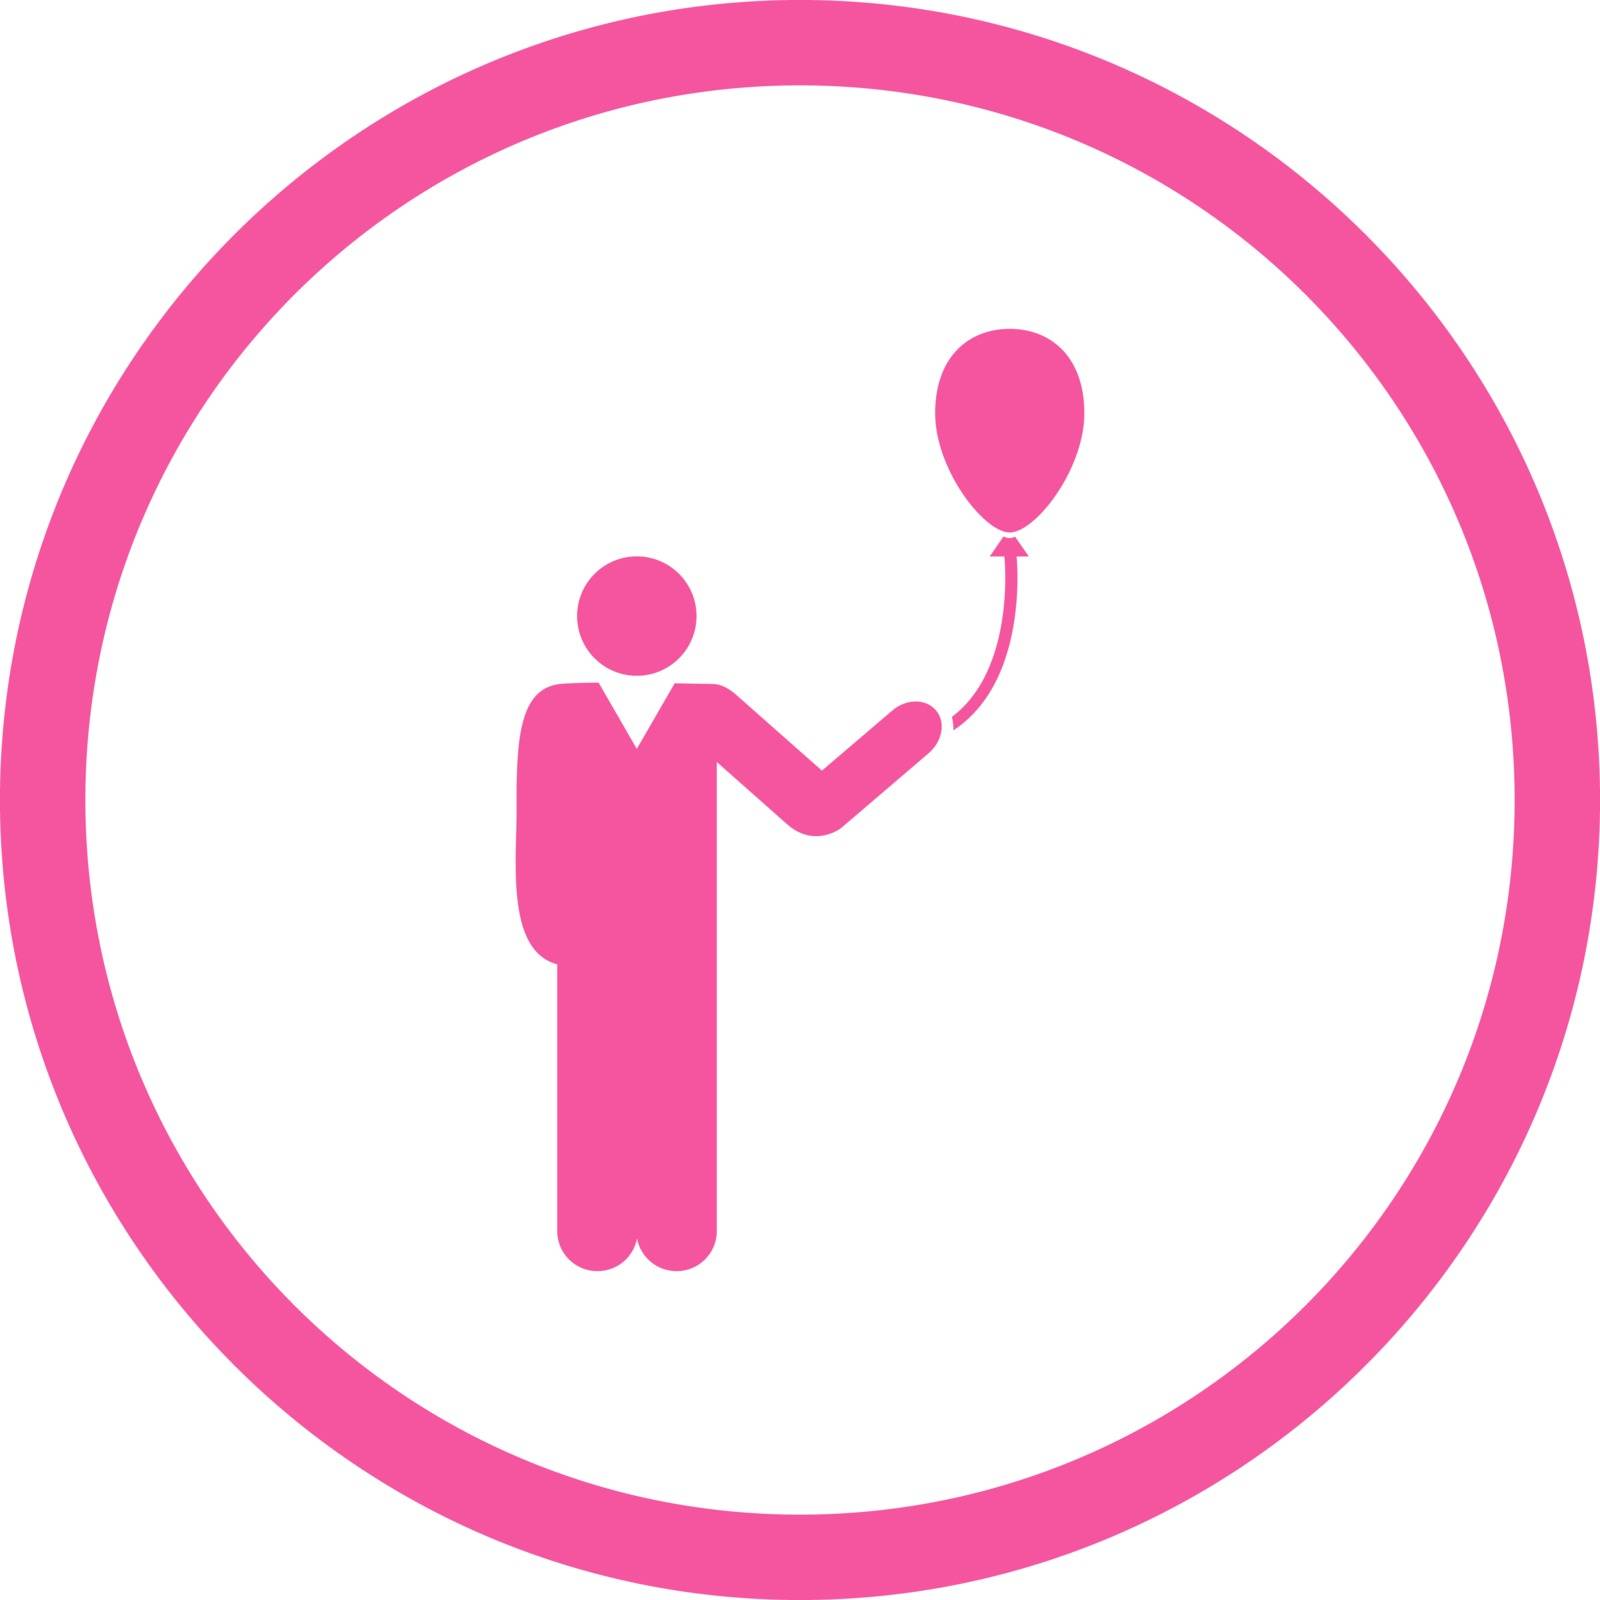 Holiday vector icon. This rounded flat symbol is drawn with pink color on a white background.